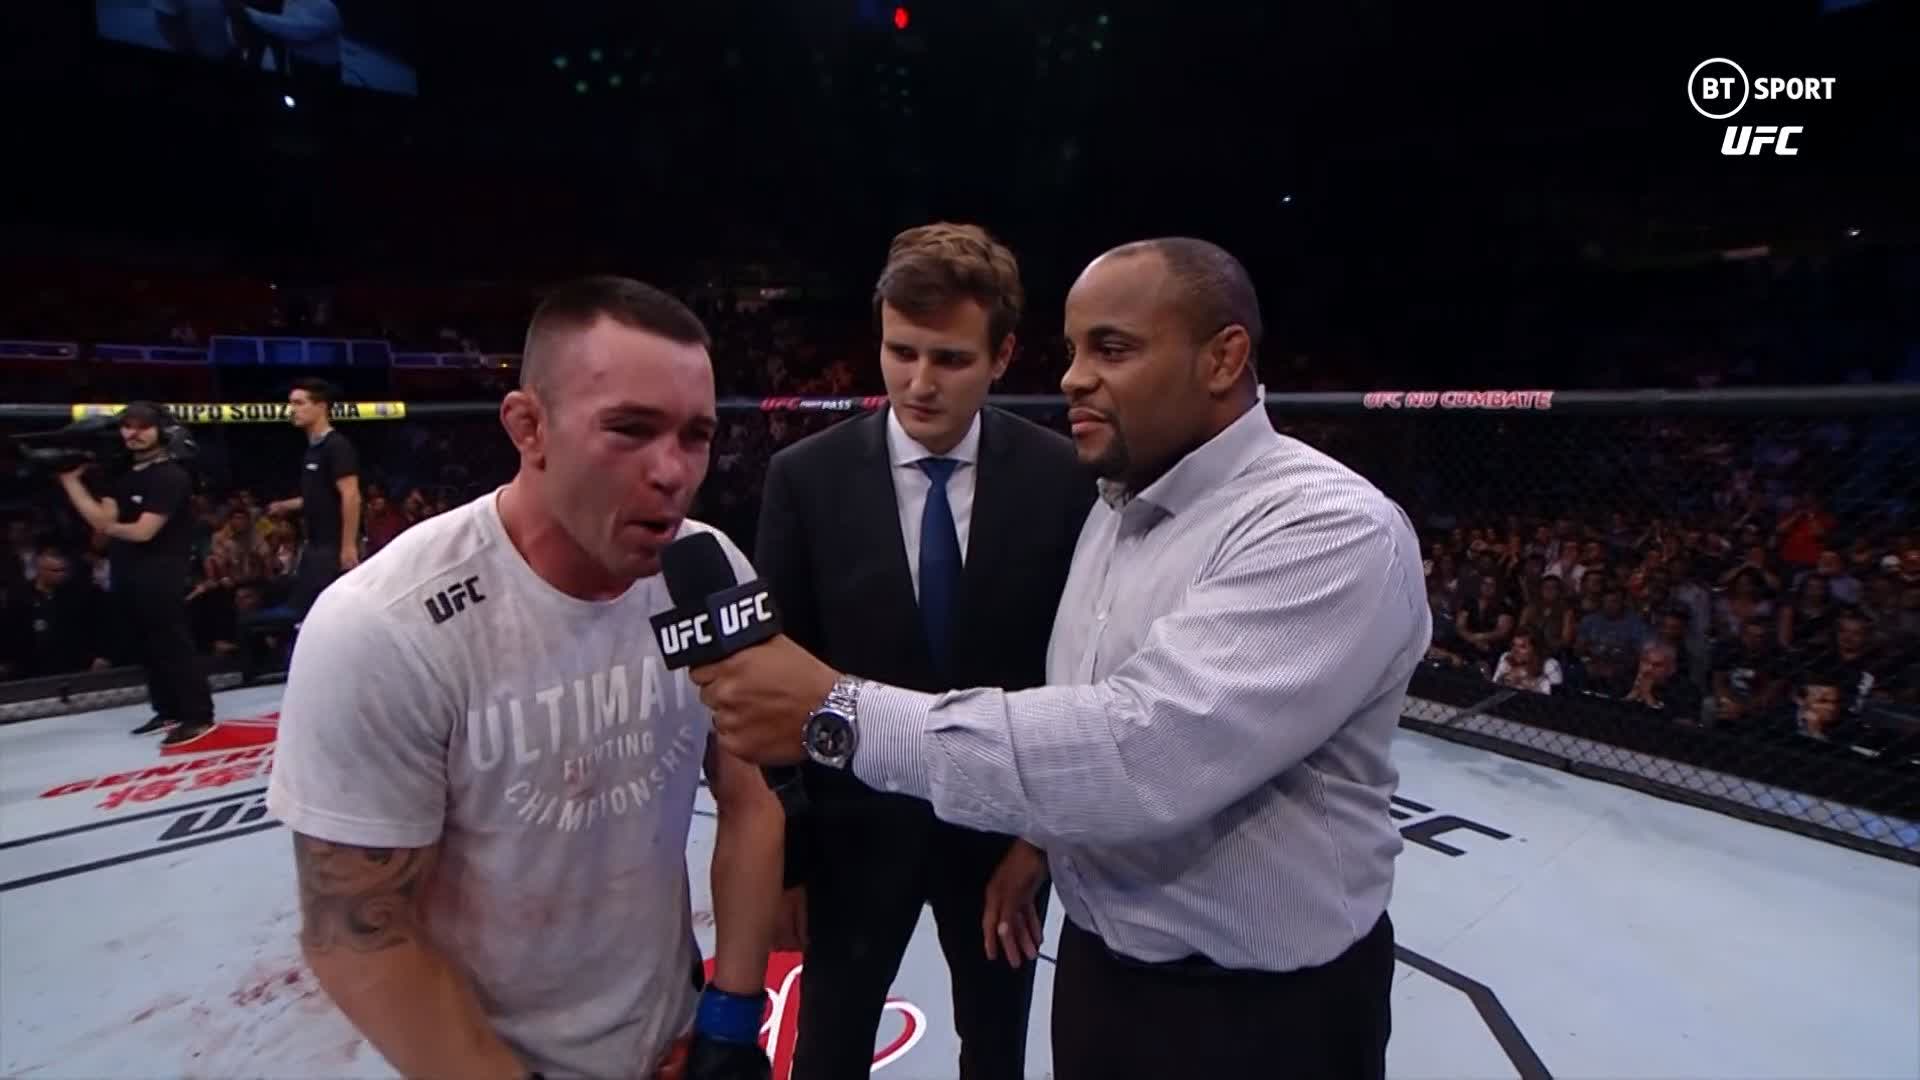 UFC on BT Sport on Twitter: ""BRAZIL YOU'RE A DUMP!" "All you filthy animals  suck!" 😯 The moment Colby Covington's heel turn was fully complete...  #UFC245 | December 14 | BT Sport